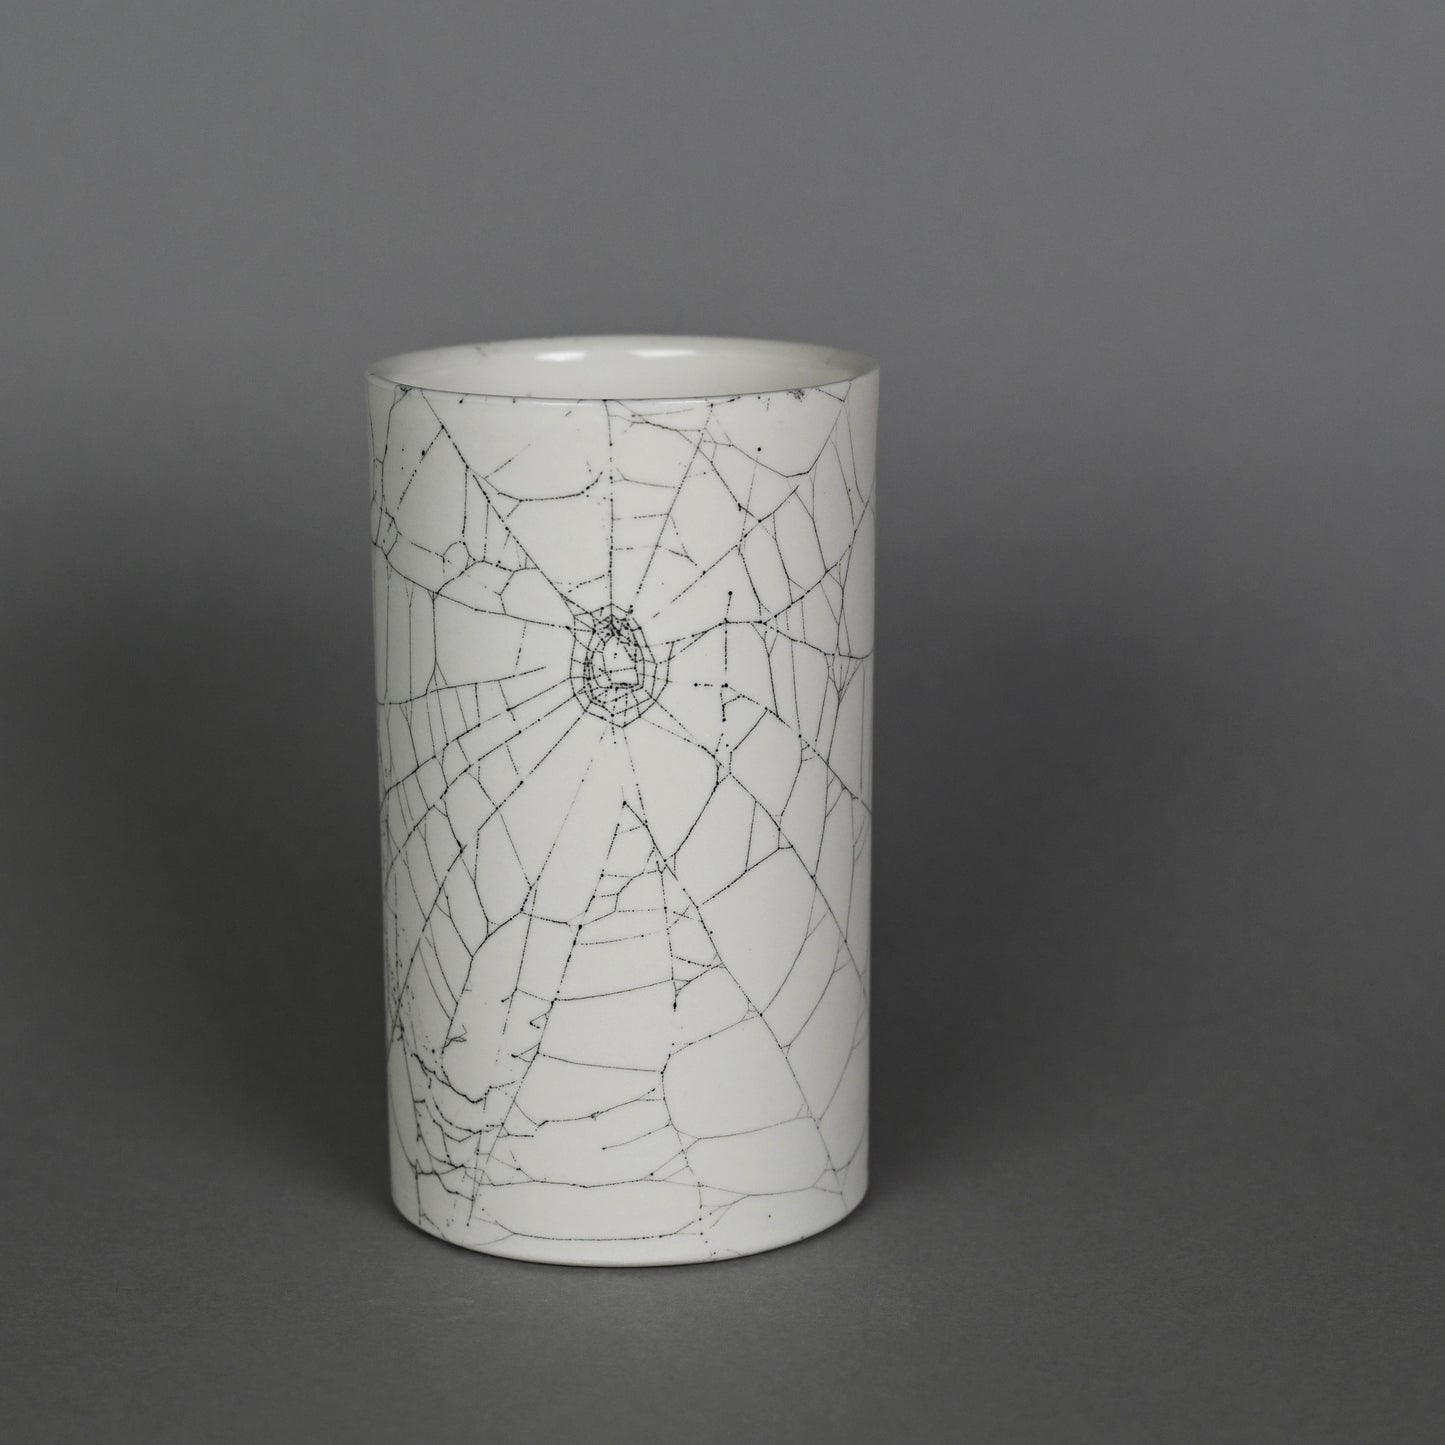 Web on Clay (199), Collected September 19, 2022